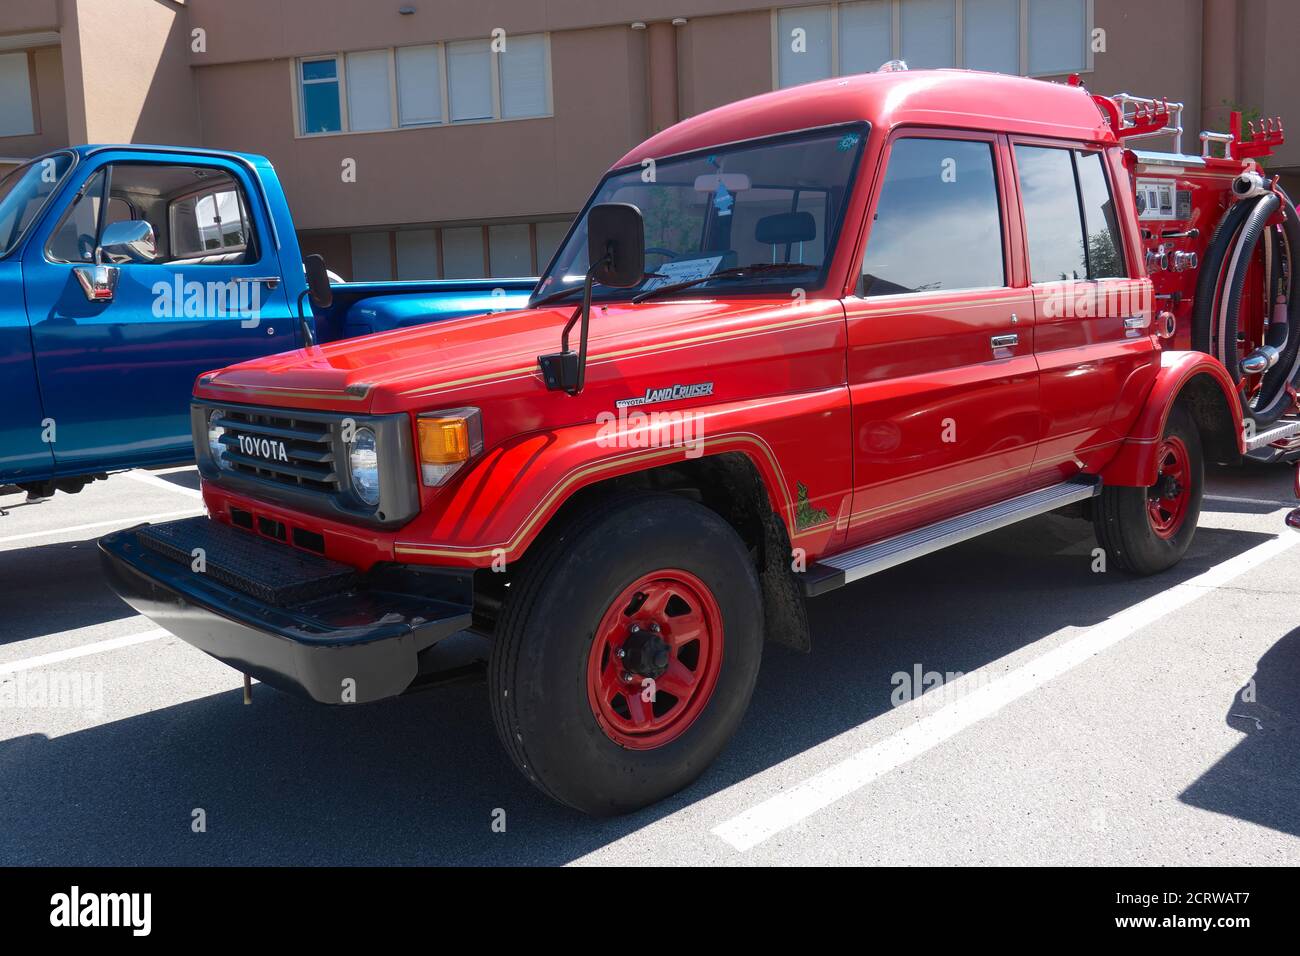 A red vintage Toyota Landcruiser Firetruck at a car show in Maple Ridge, B. C., Canada in 2019. Stock Photo